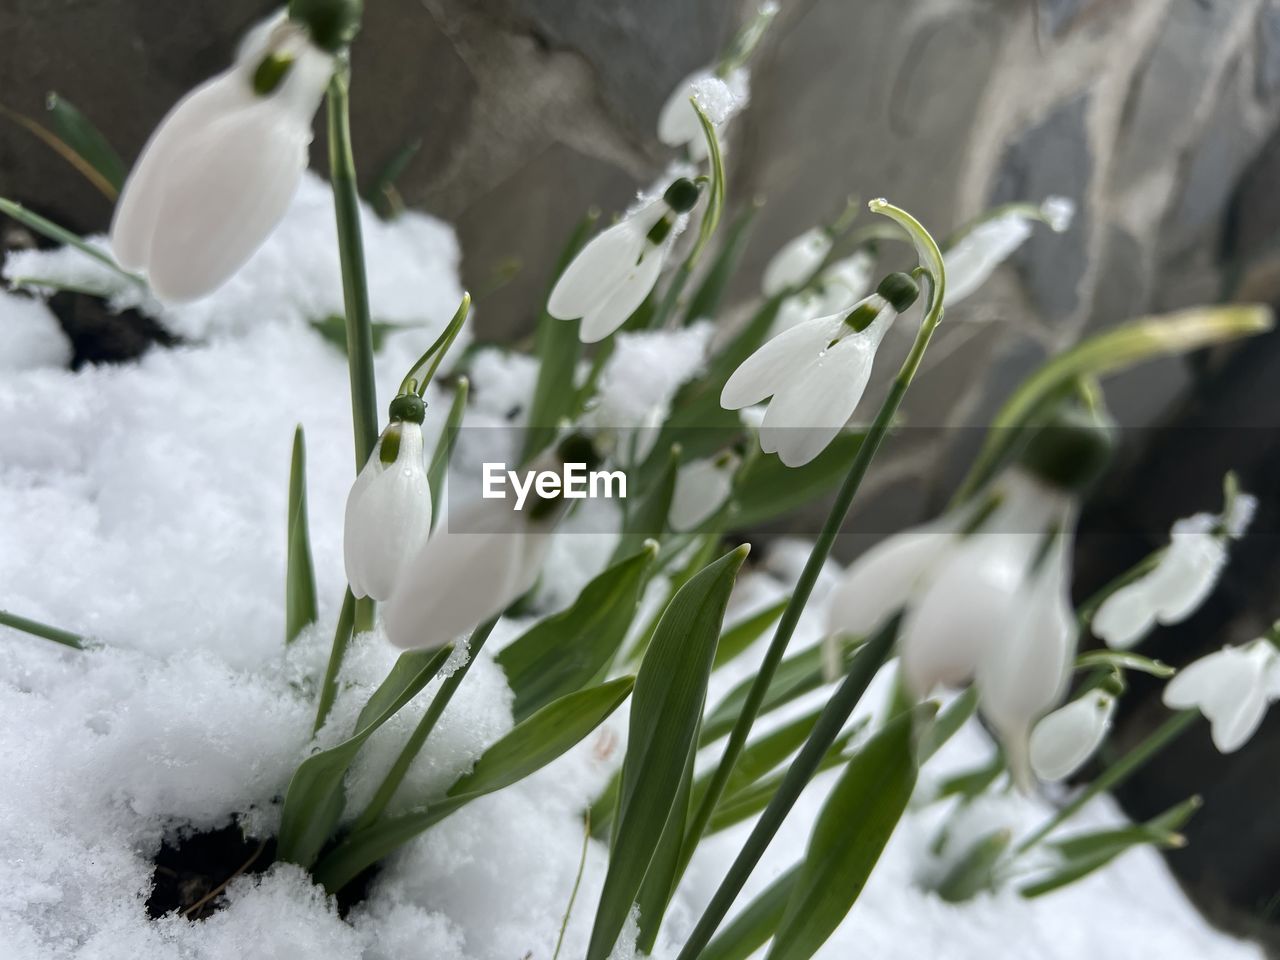 snow, plant, white, flower, nature, beauty in nature, winter, cold temperature, close-up, branch, leaf, plant part, no people, macro photography, freshness, blossom, flowering plant, water, outdoors, ice, growth, green, frozen, drop, environment, day, petal, selective focus, wet, freezing